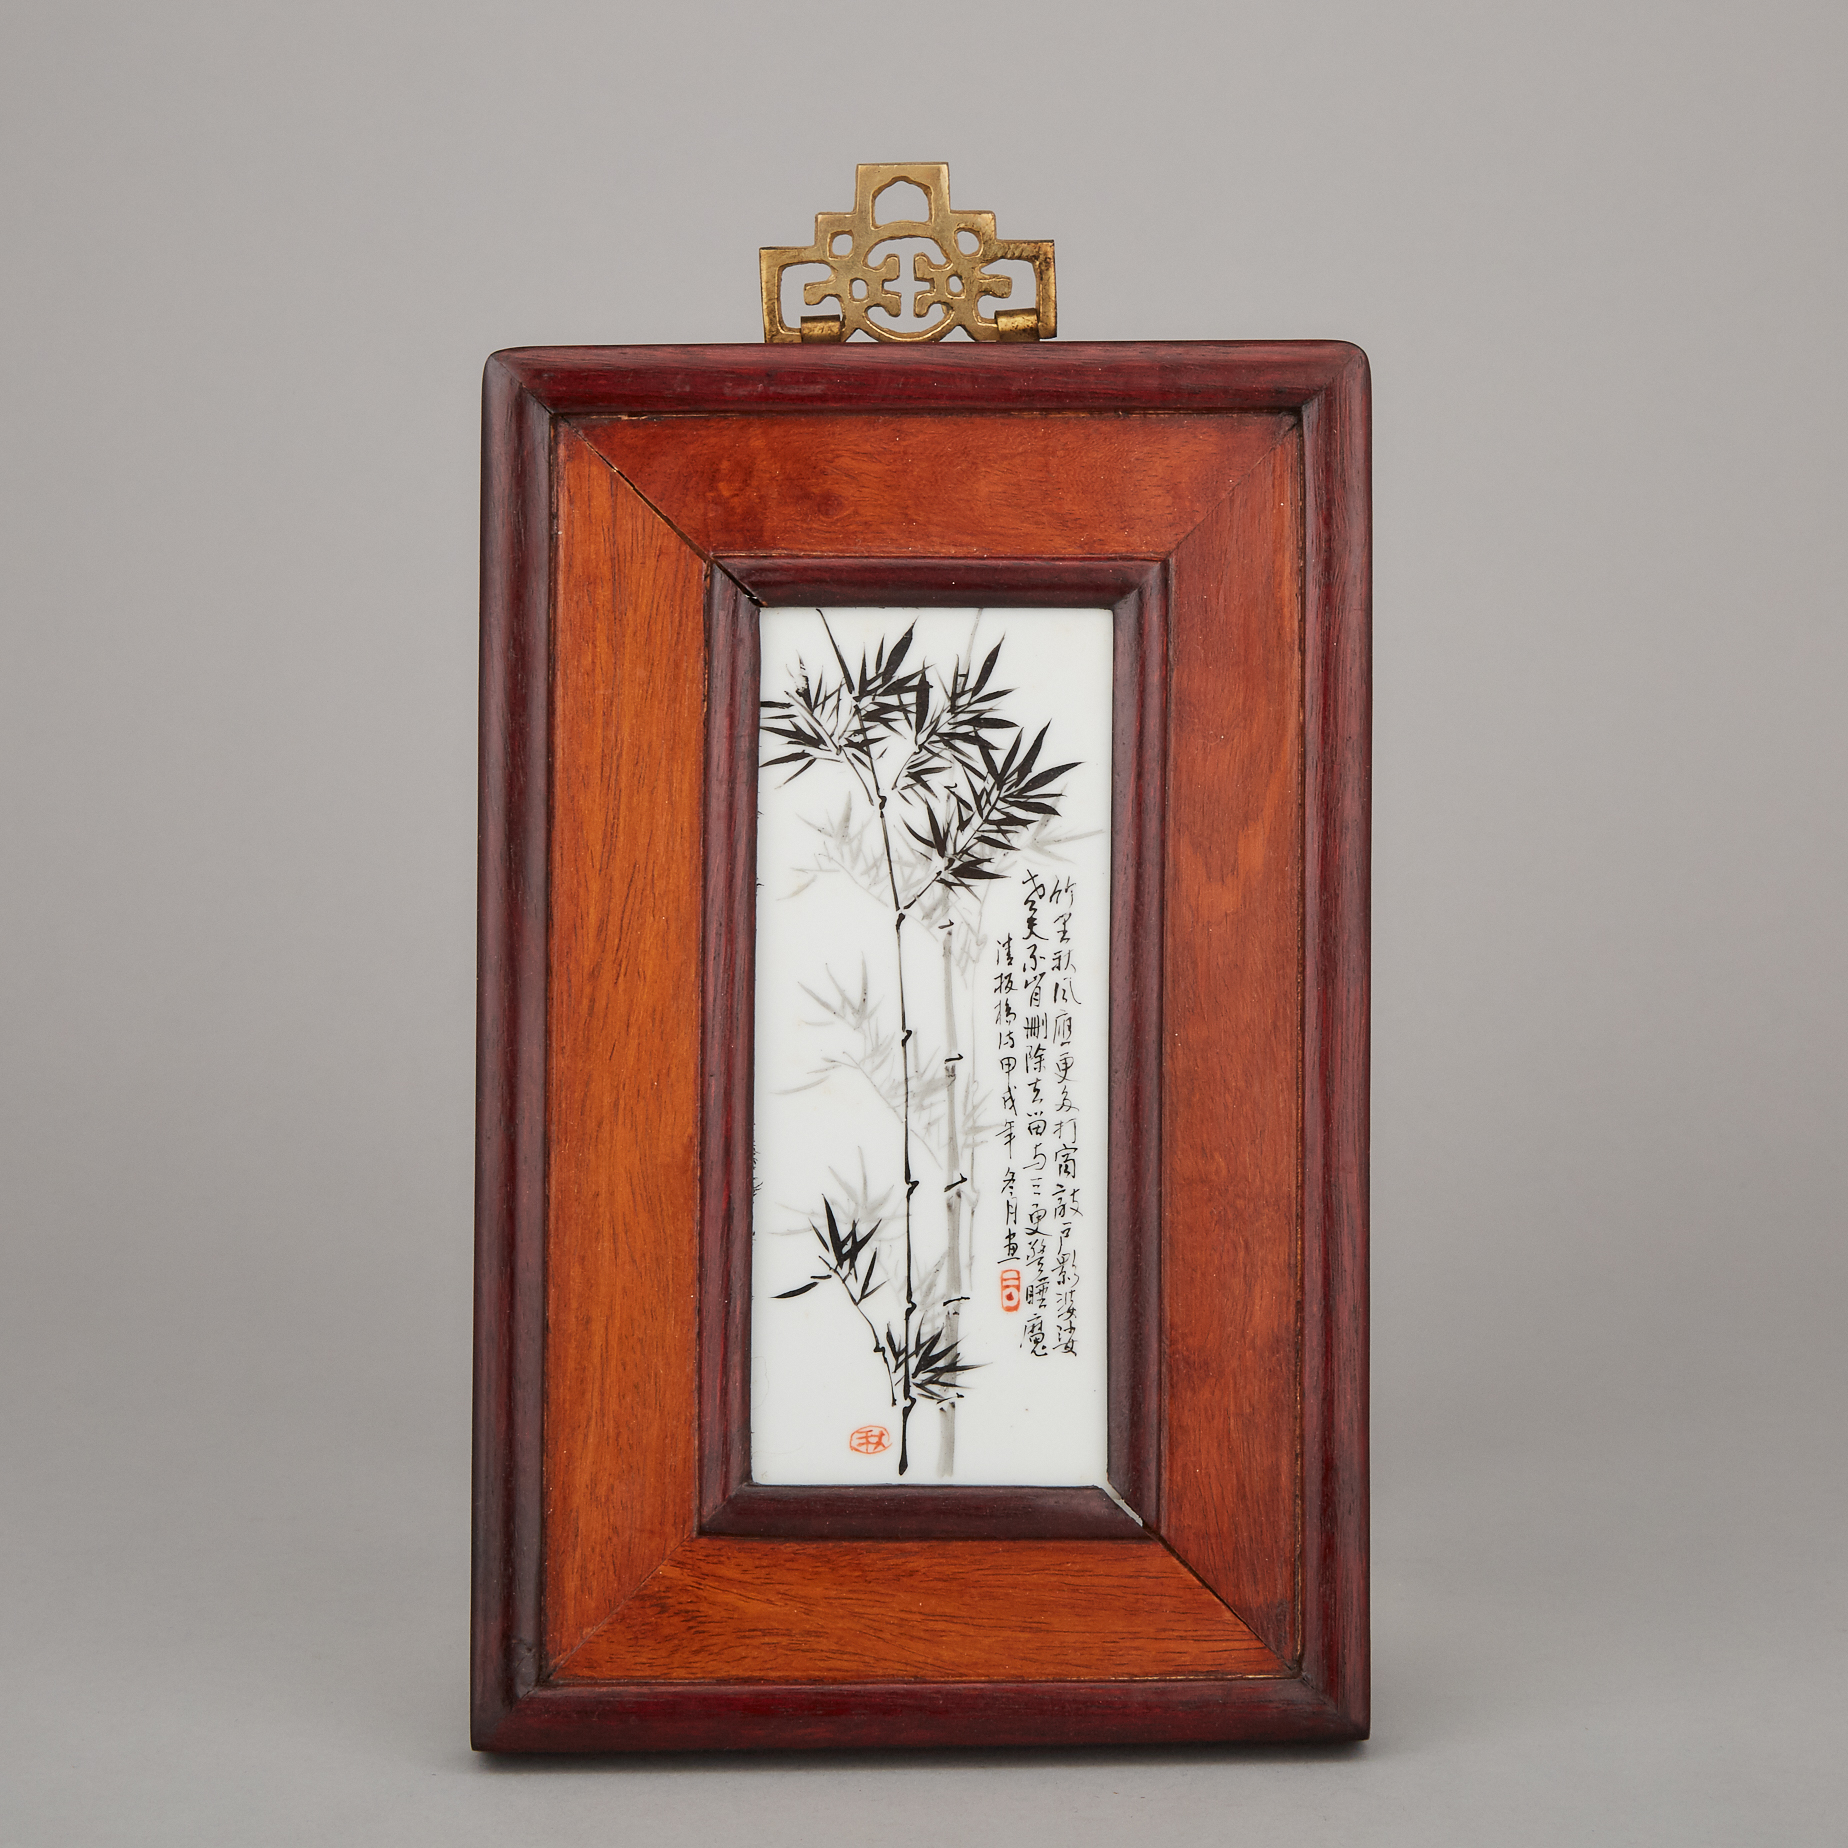 A Small Framed Porcelain Panel of Bamboo and Calligraphy